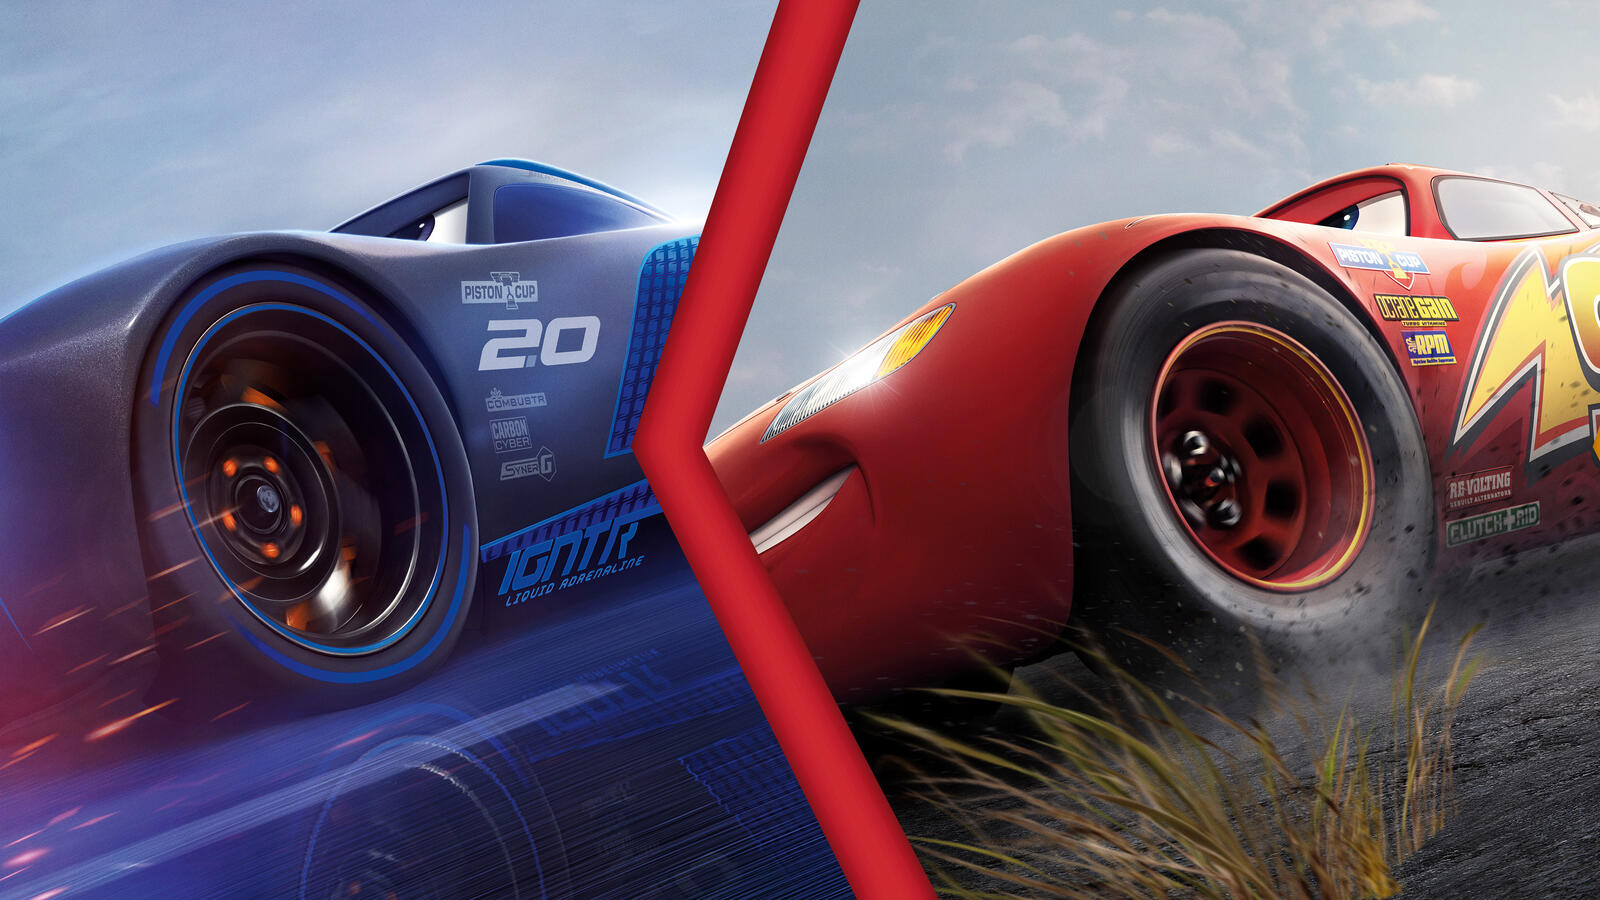 Wallpapers cars 3 pixar Animated movies on the desktop